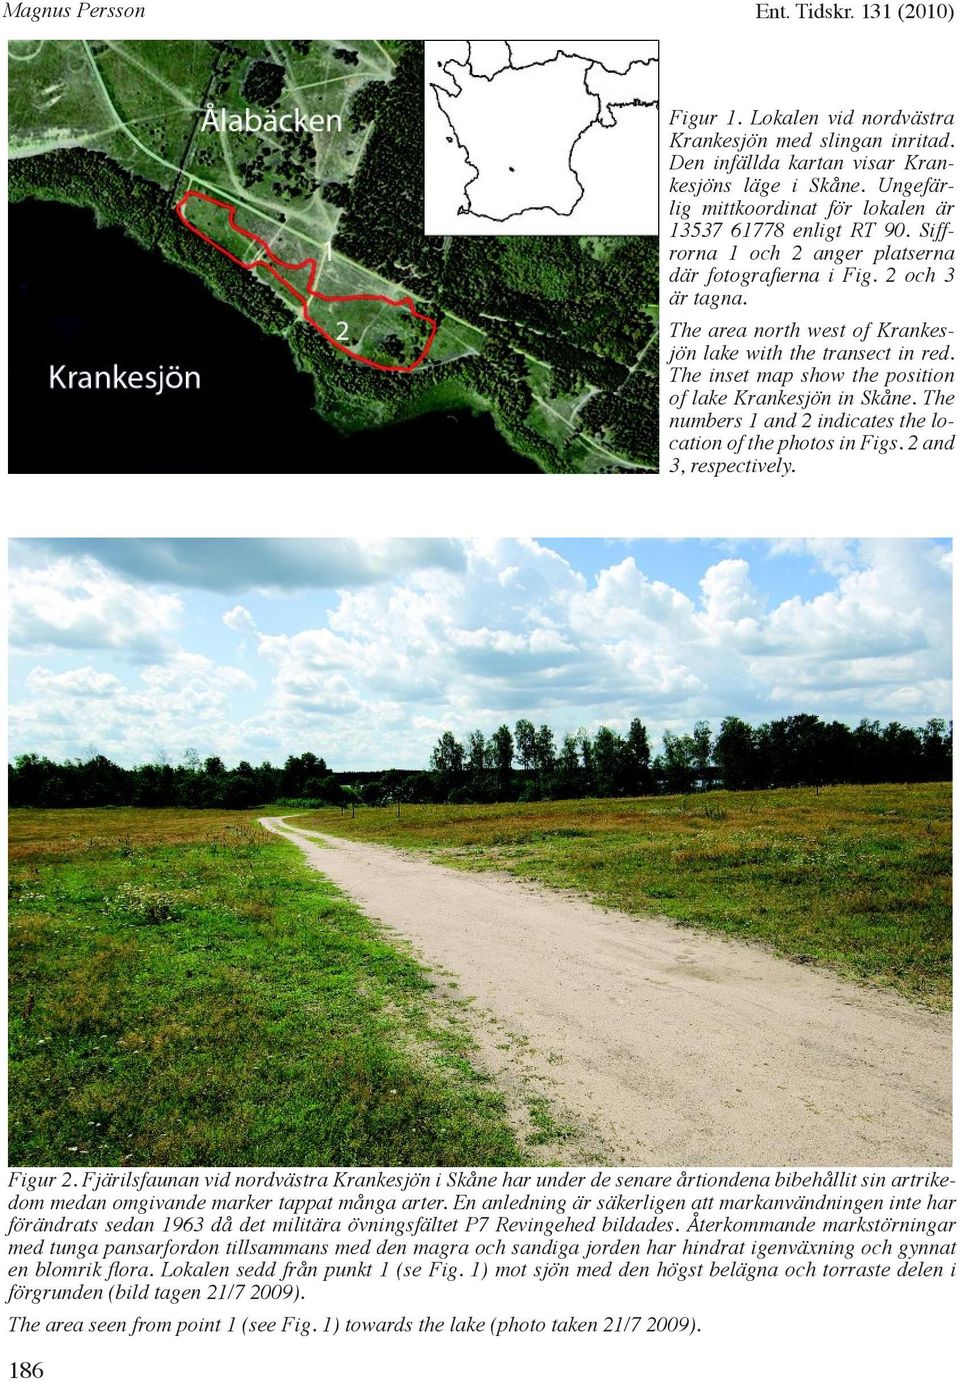 The area north west of Krankesjön lake with the transect in red. The inset map show the position of lake Krankesjön in Skåne. The numbers 1 and 2 indicates the location of the photos in Figs.